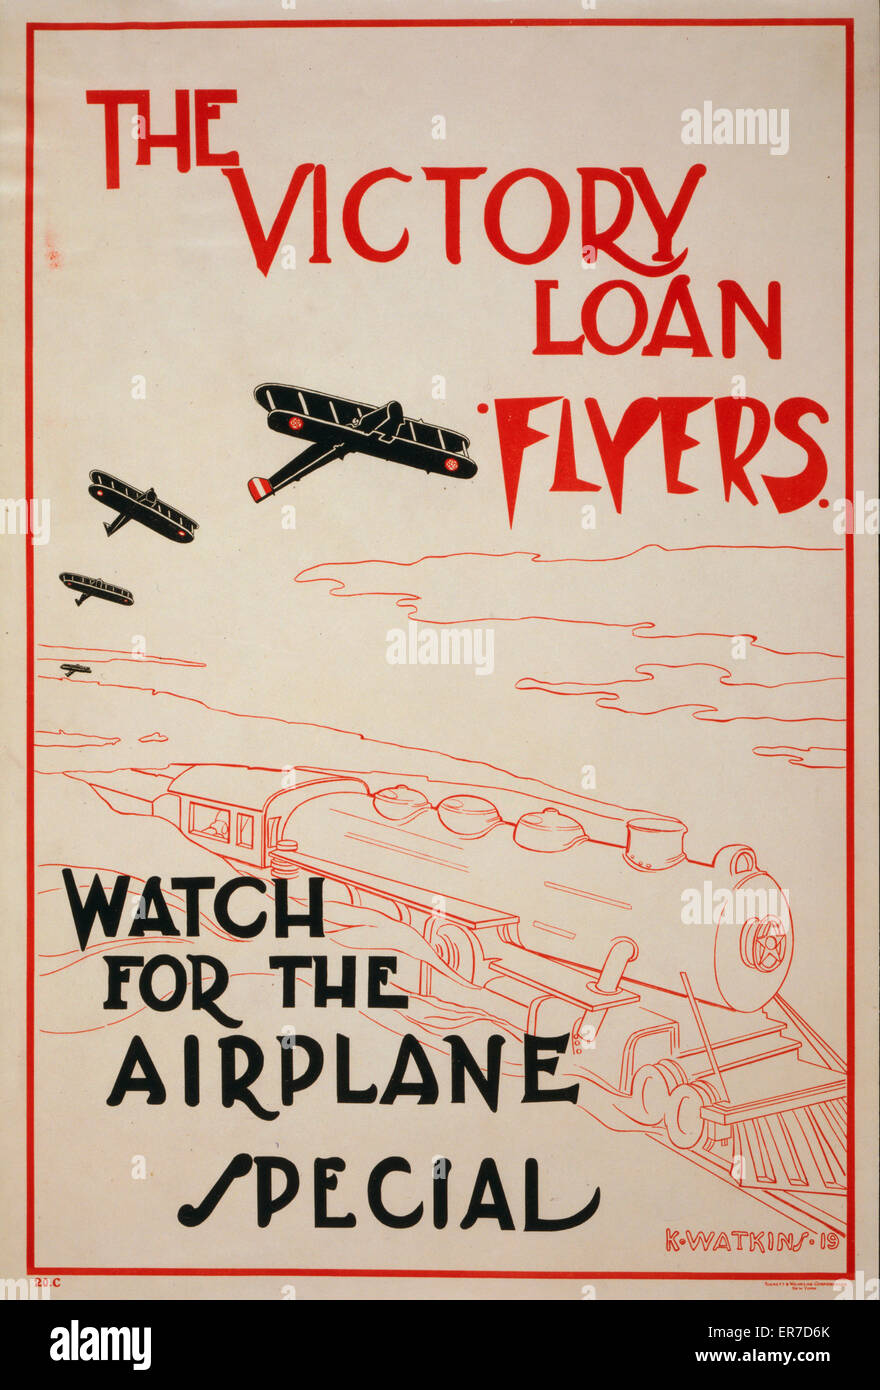 The Victory Loan flyers - Watch for the airplane special Stock Photo